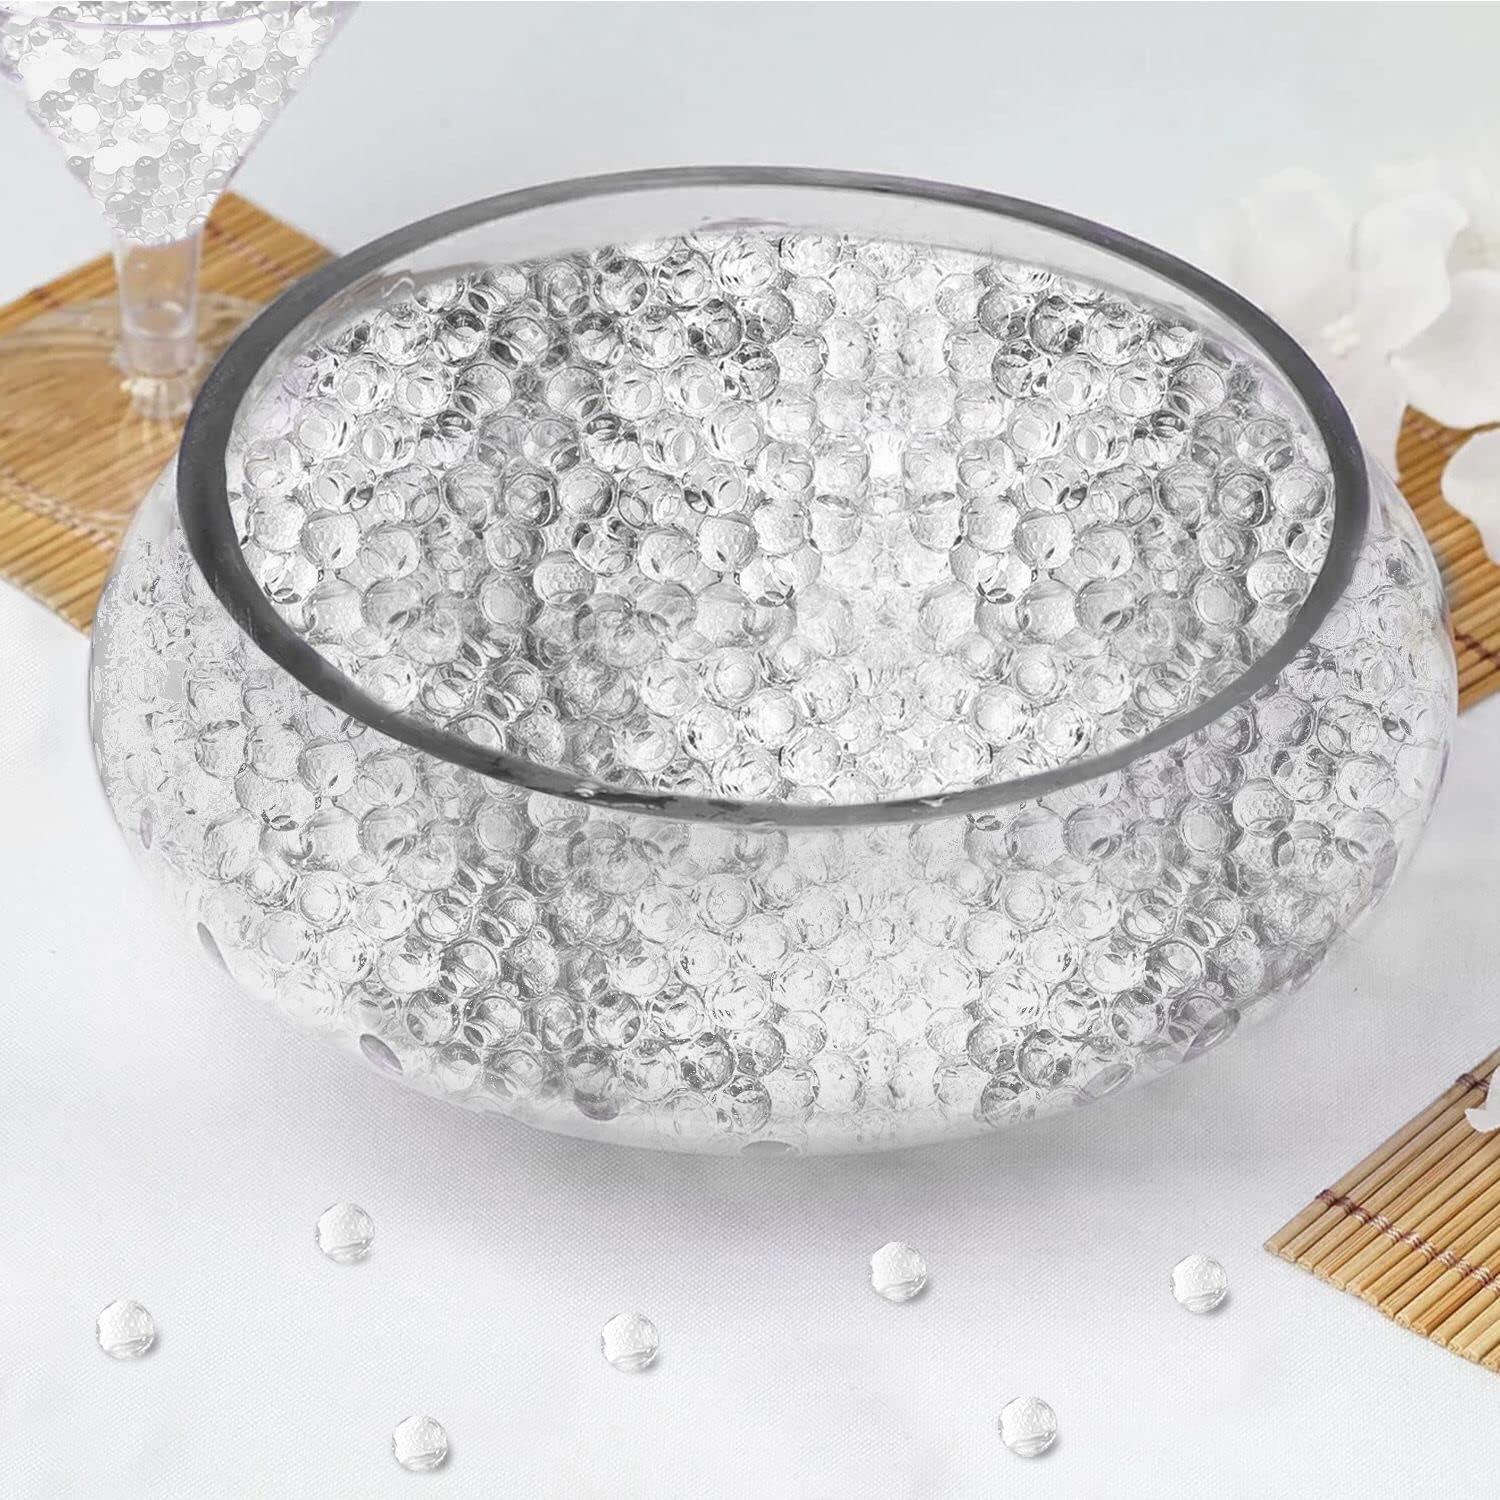 60000 Clear Water Gel Jelly Beads,Vase Fillers for Floating Pearls